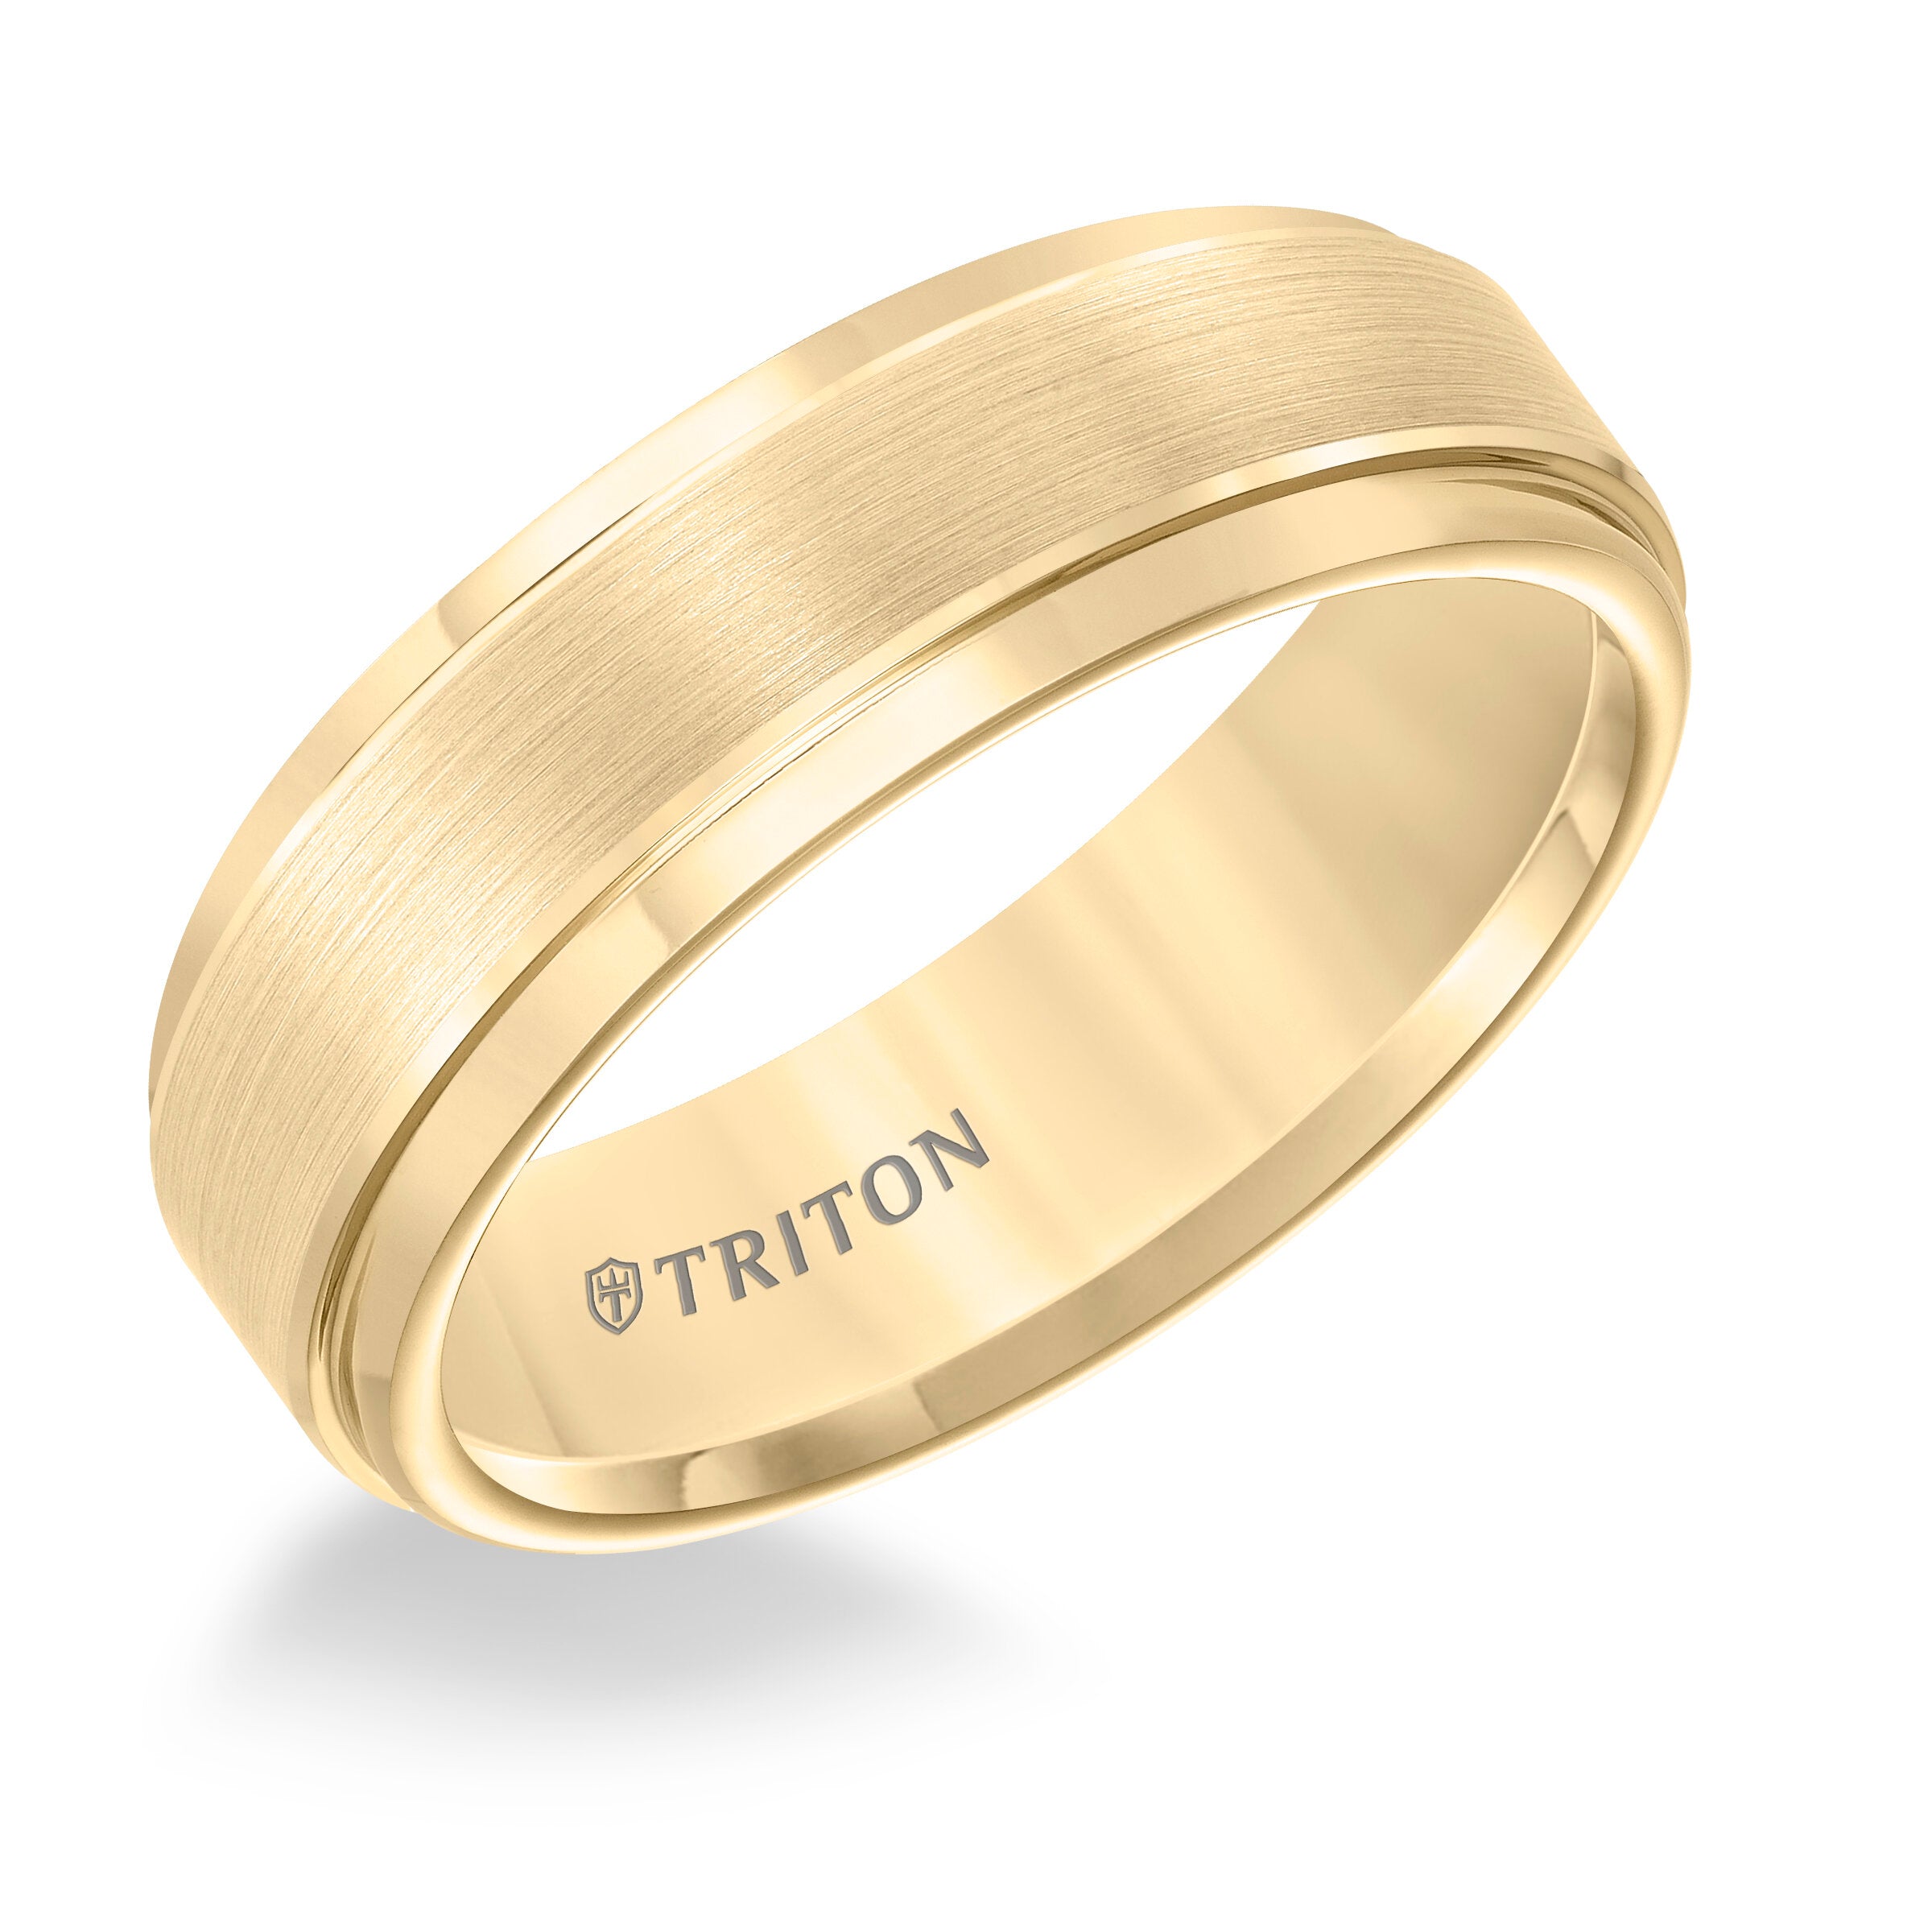 7MM Yellow Tungsten Carbide Ring - Brushed Finish and Step Edge